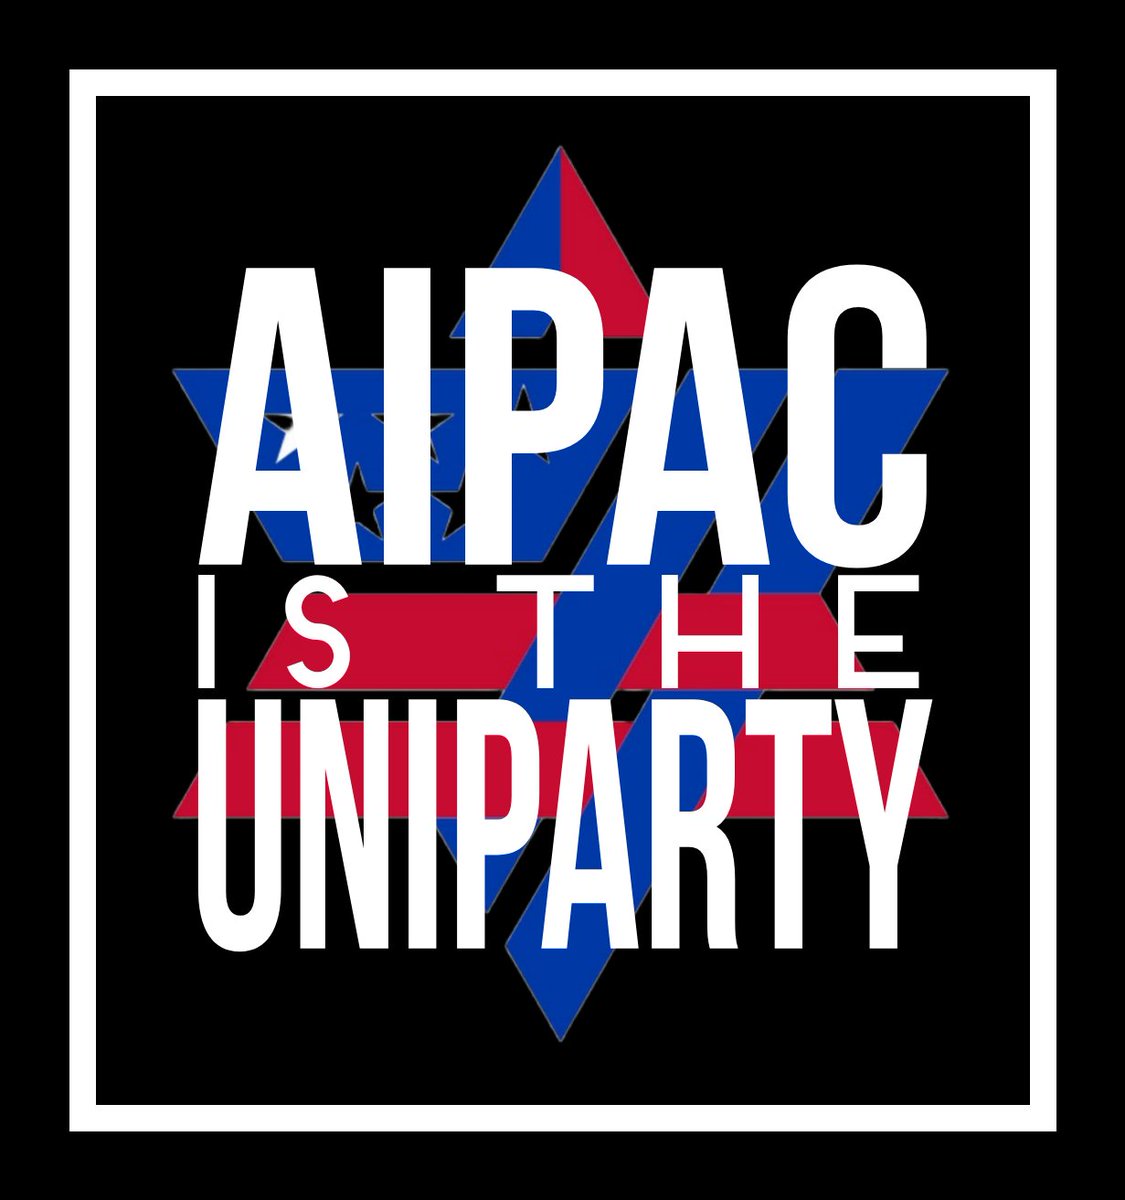 If AIPAC funds and controls 98% of the Democratic representatives in the house, and 98% of the Republican representatives in the house.... There is no longer a republican or democratic party. AIPAC is the ONLY ruling party in Congress. Our government is beholden to ISRAEL.